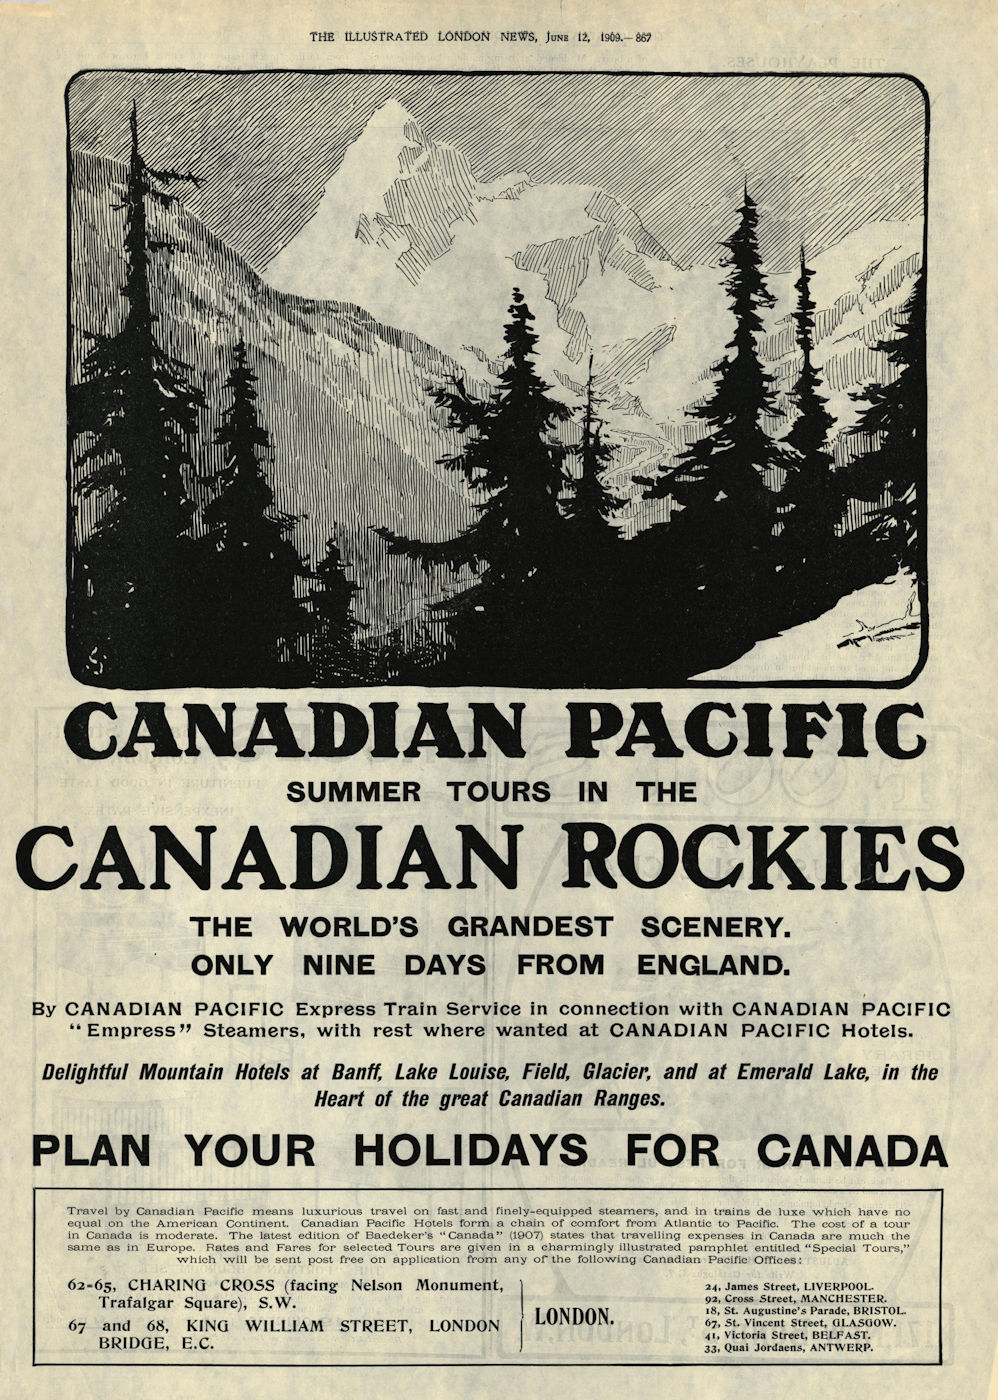 CANADIAN Pacific ADVERT. Rockies summer tours. Only 9 days from England 1909